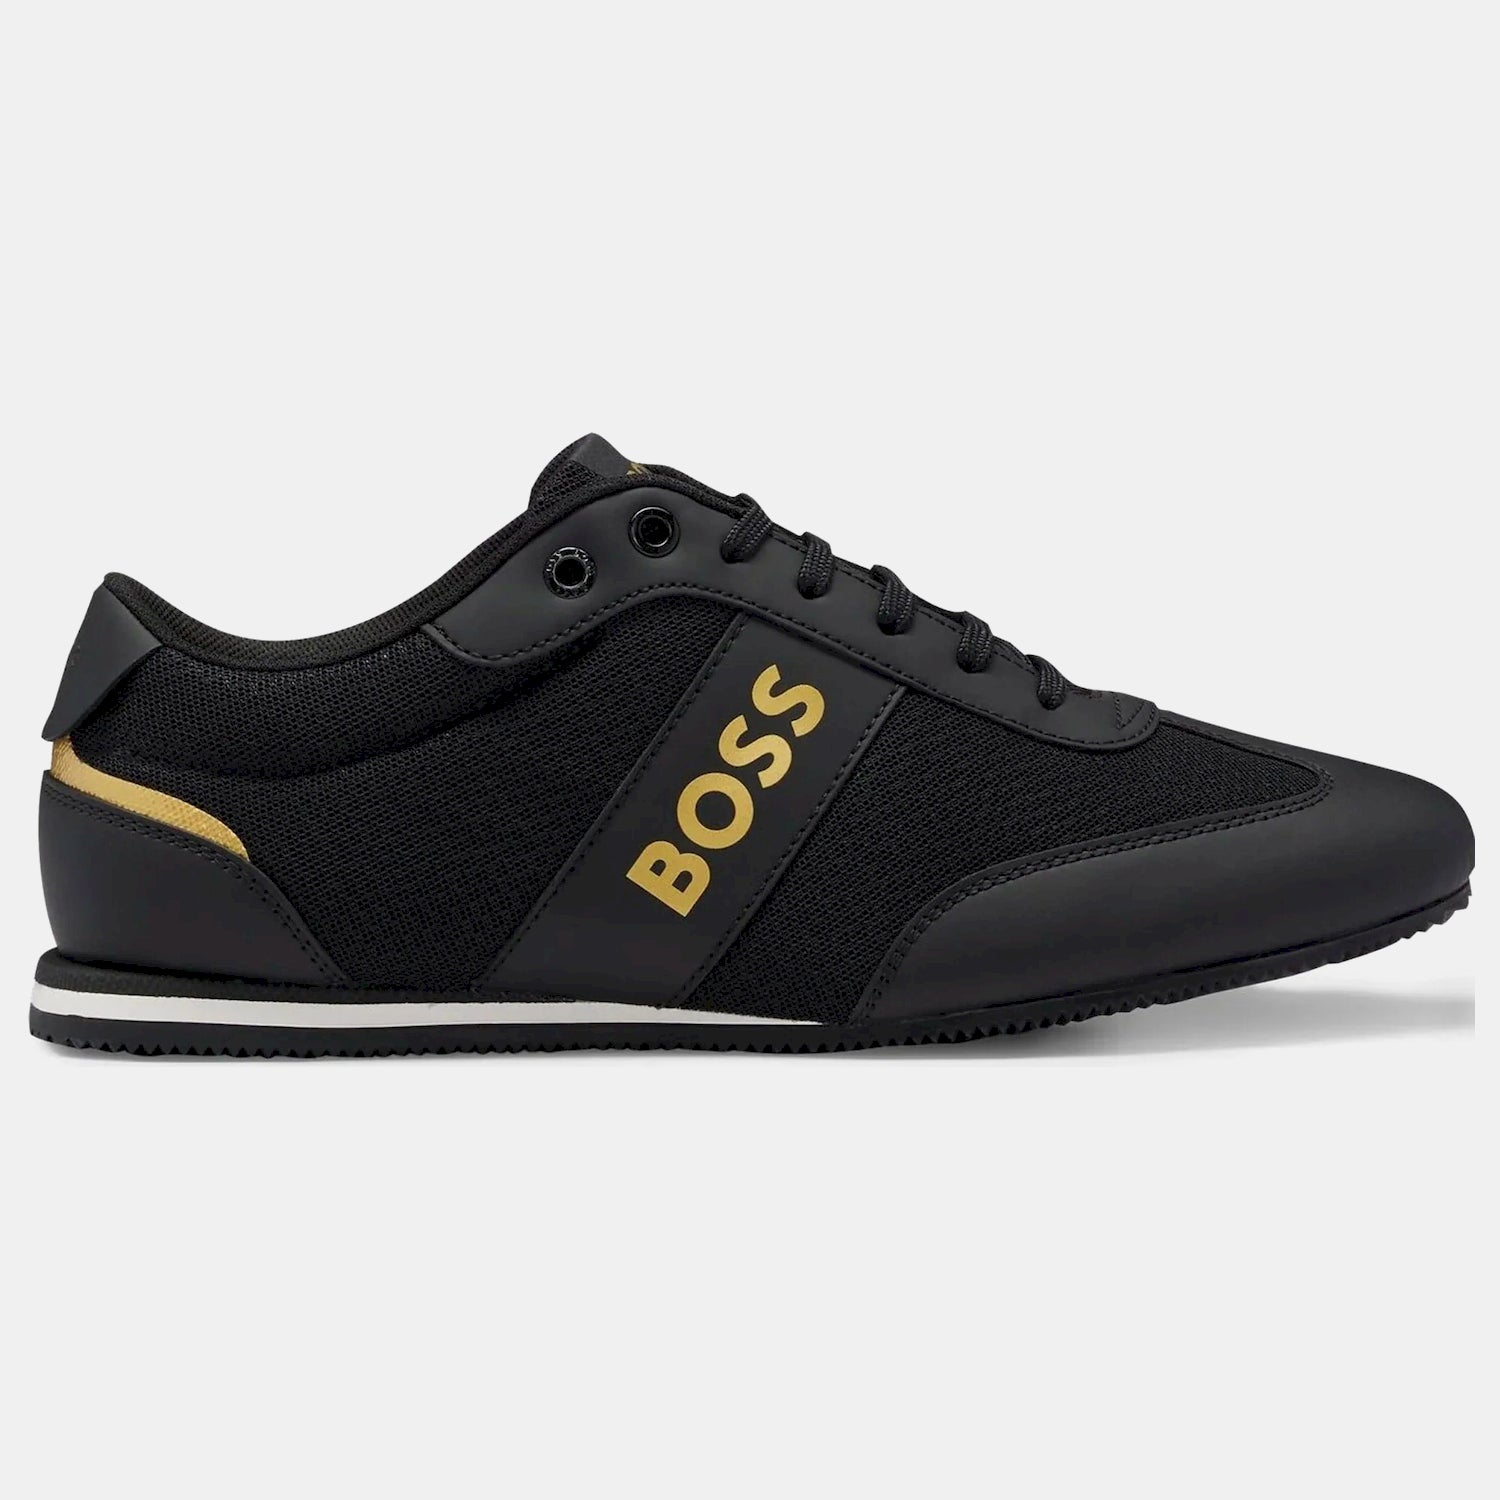 Boss Sapatilhas Sneakers Shoes Rusham Lowp Mx Blk Gold Preto Ouro_shot2